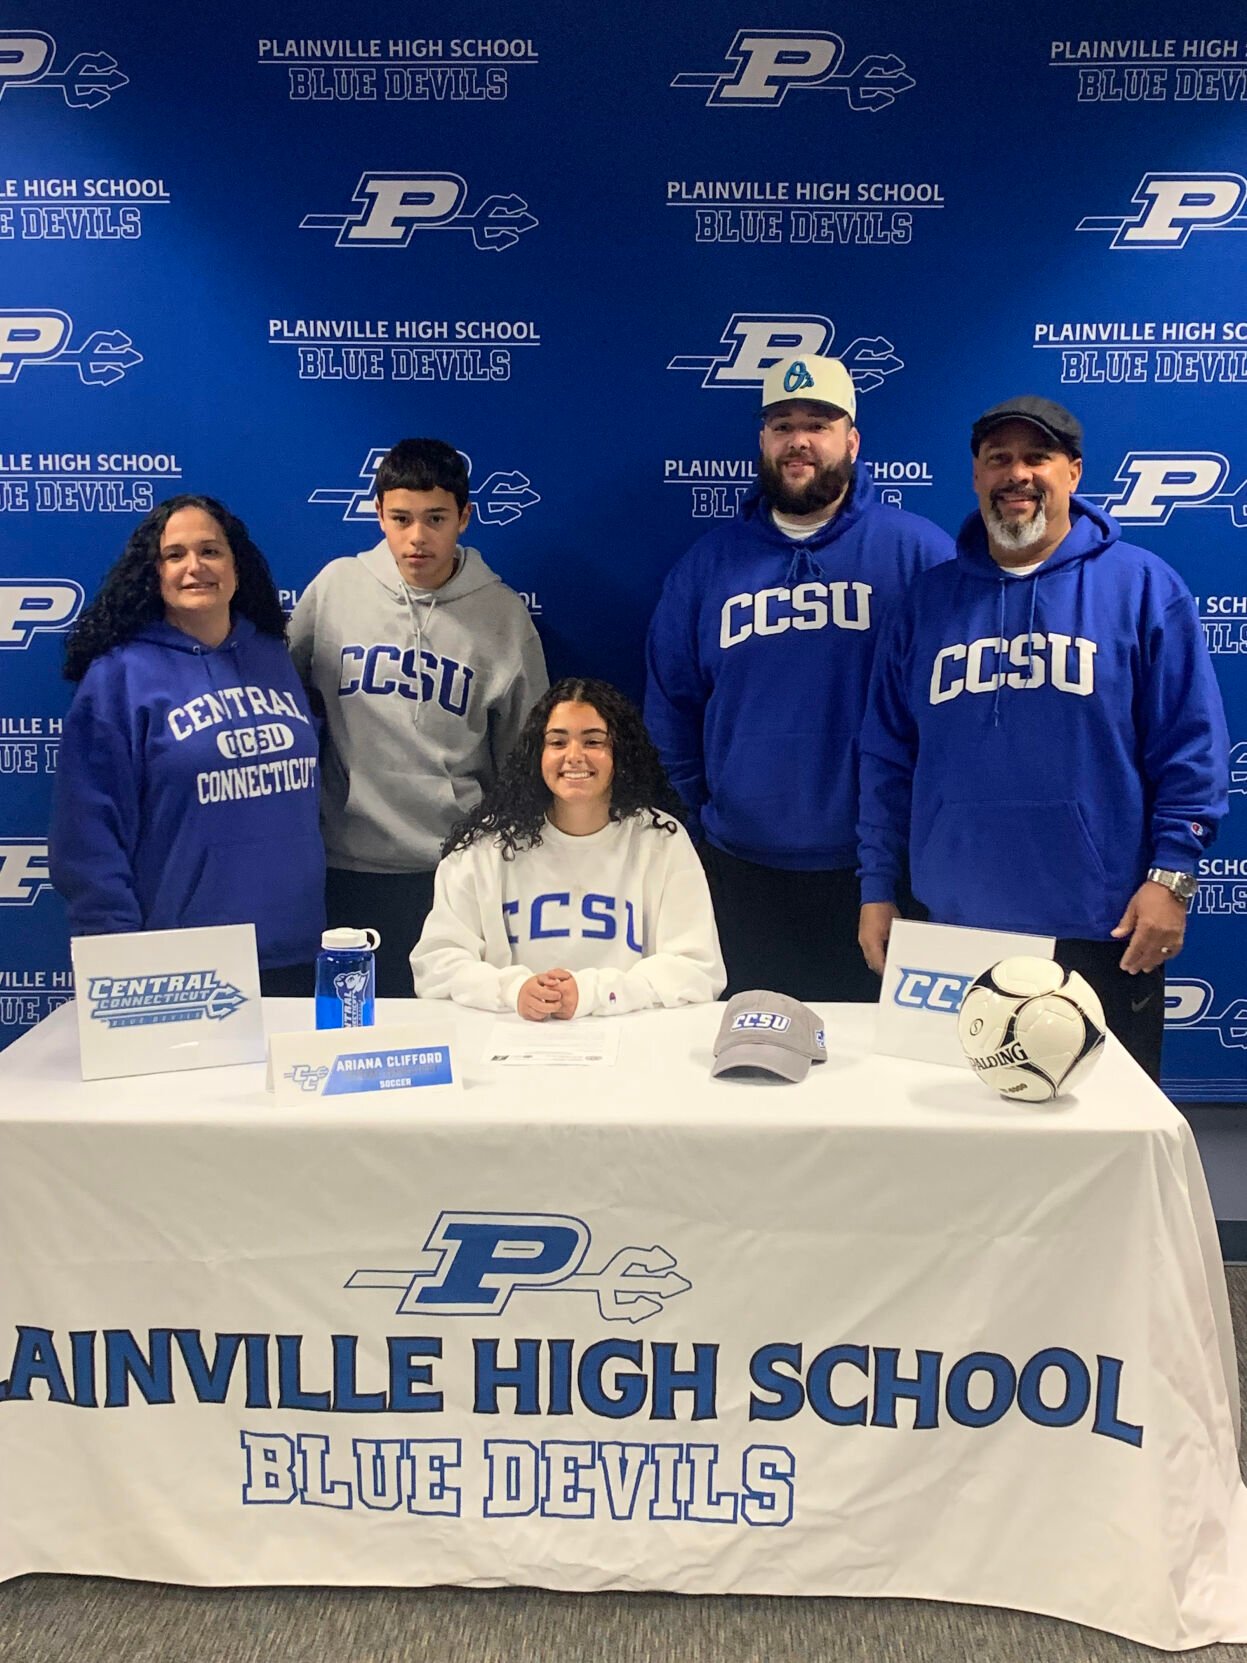 Ariana Clifford Commits to CCSU as a Holding Midfielder: Plainville Star’s Soccer Success